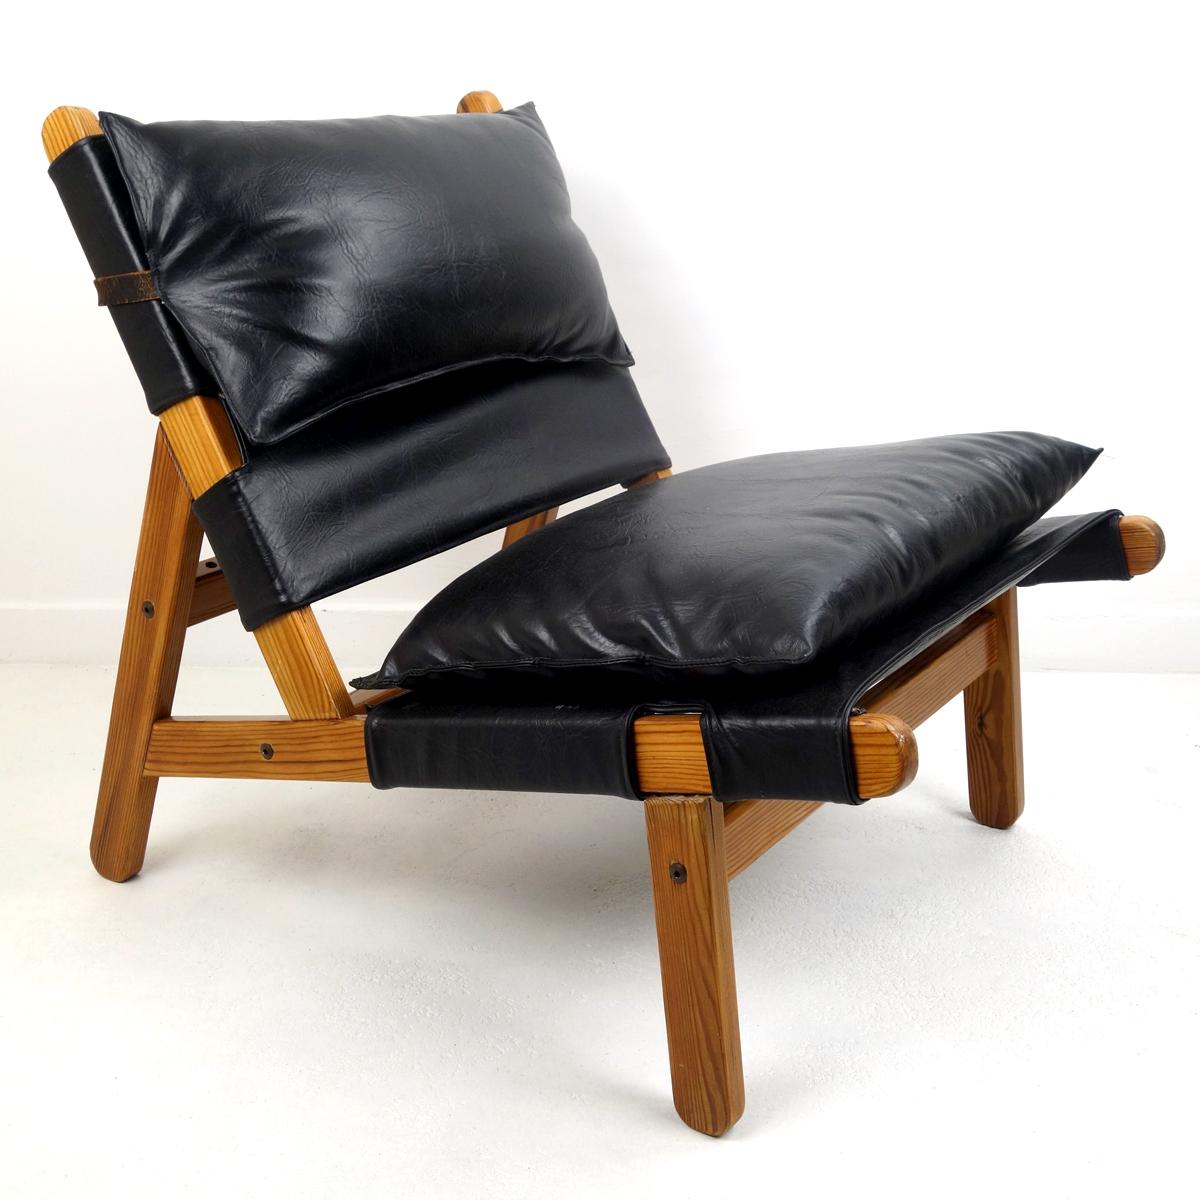 Very elegant easy chair probably dating from the 1960s. It is constructed around a wooden frame and has loose leather seat and backrest cushion.
We do not know who the designer or maker is, but we do know that it is either very rare or even a